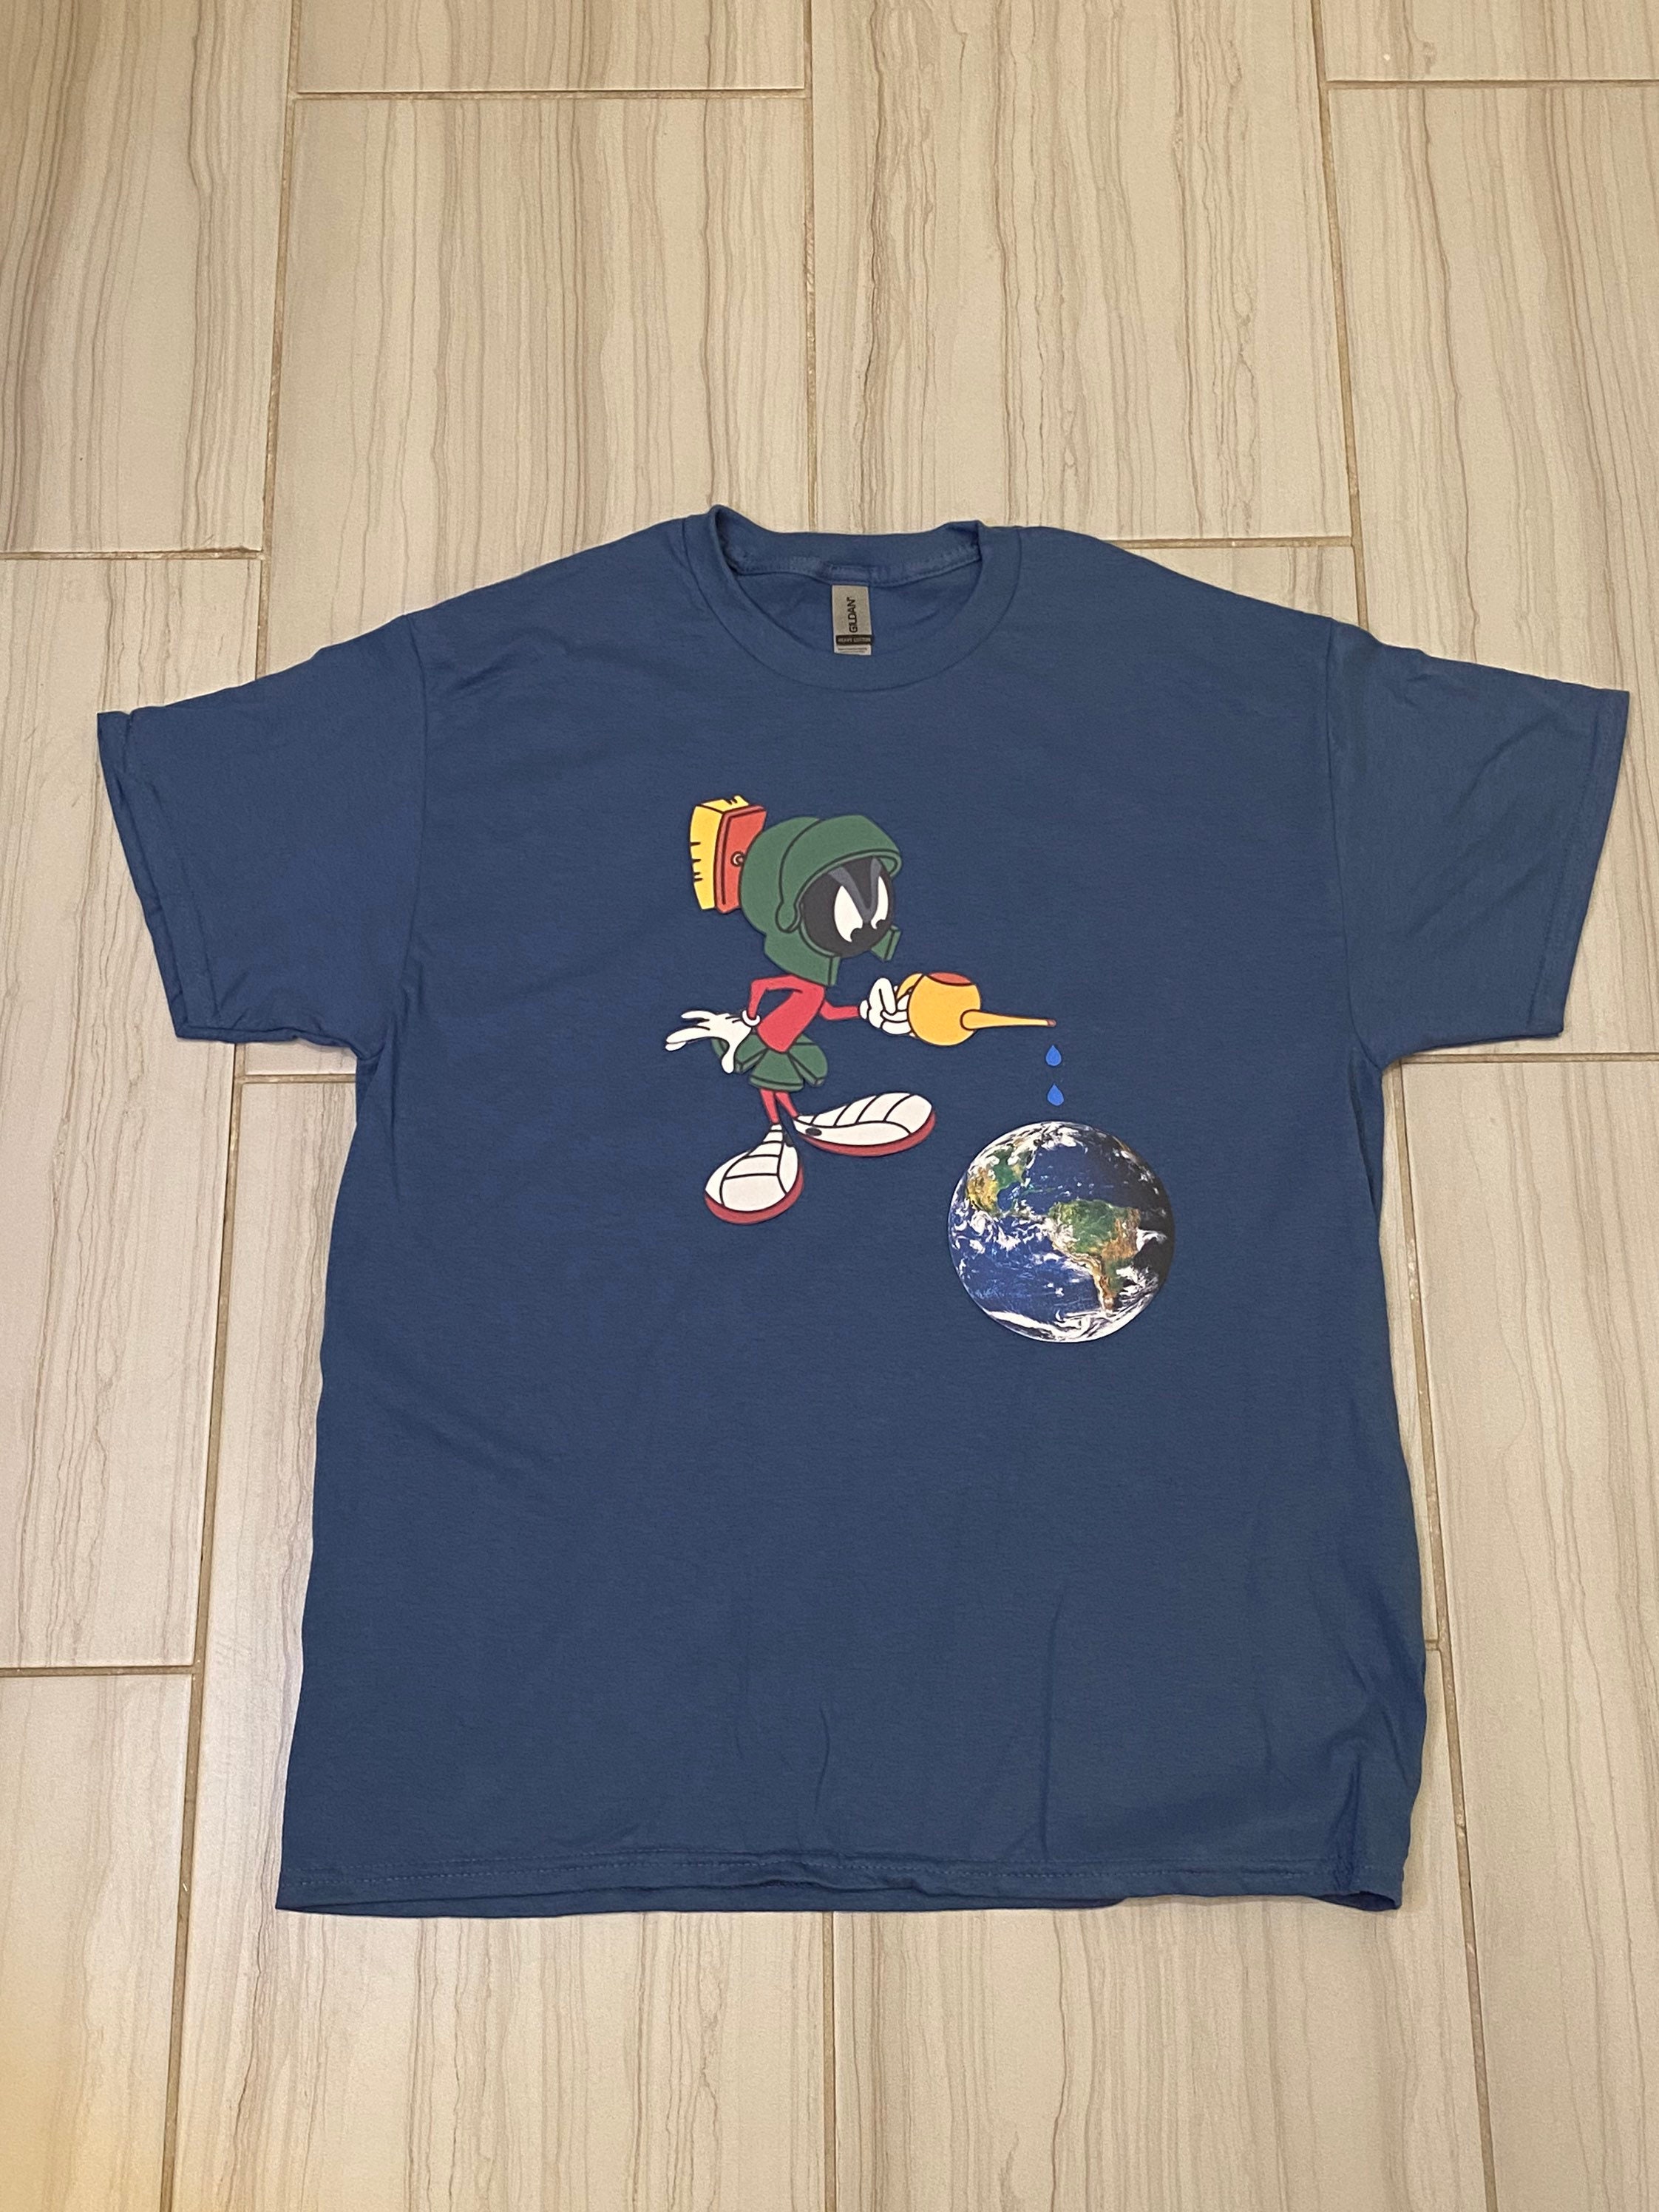 Vintage Style Marvin the Martian Graphic T-shirt - Etsy